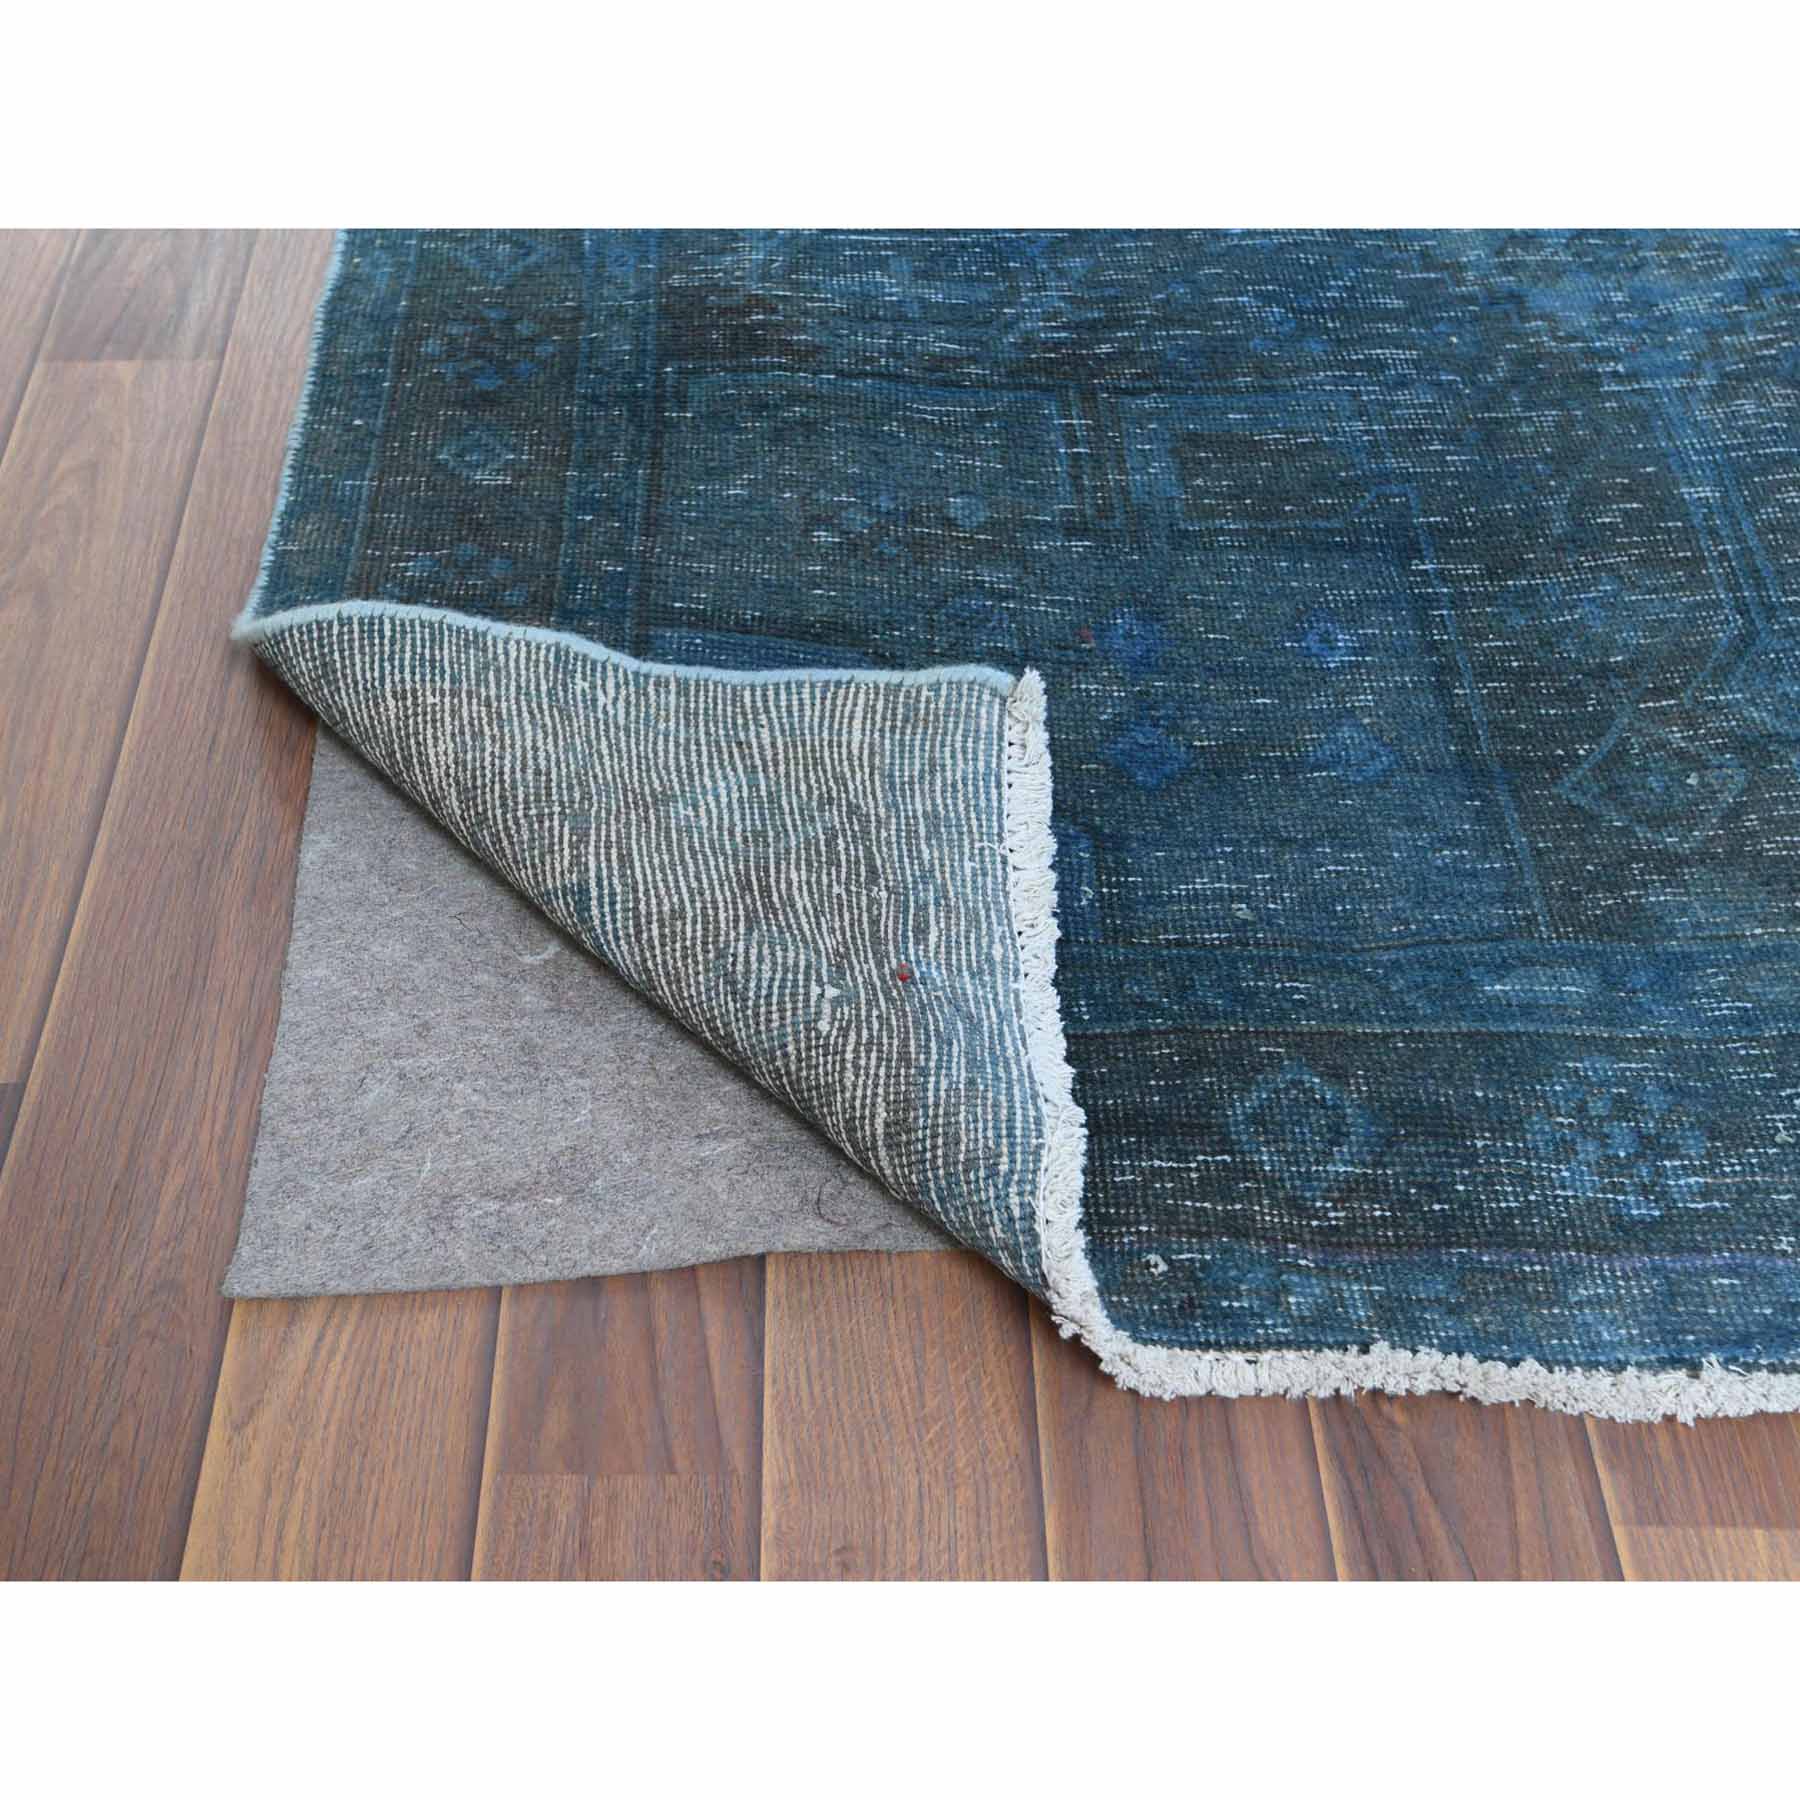 Overdyed-Vintage-Hand-Knotted-Rug-305340